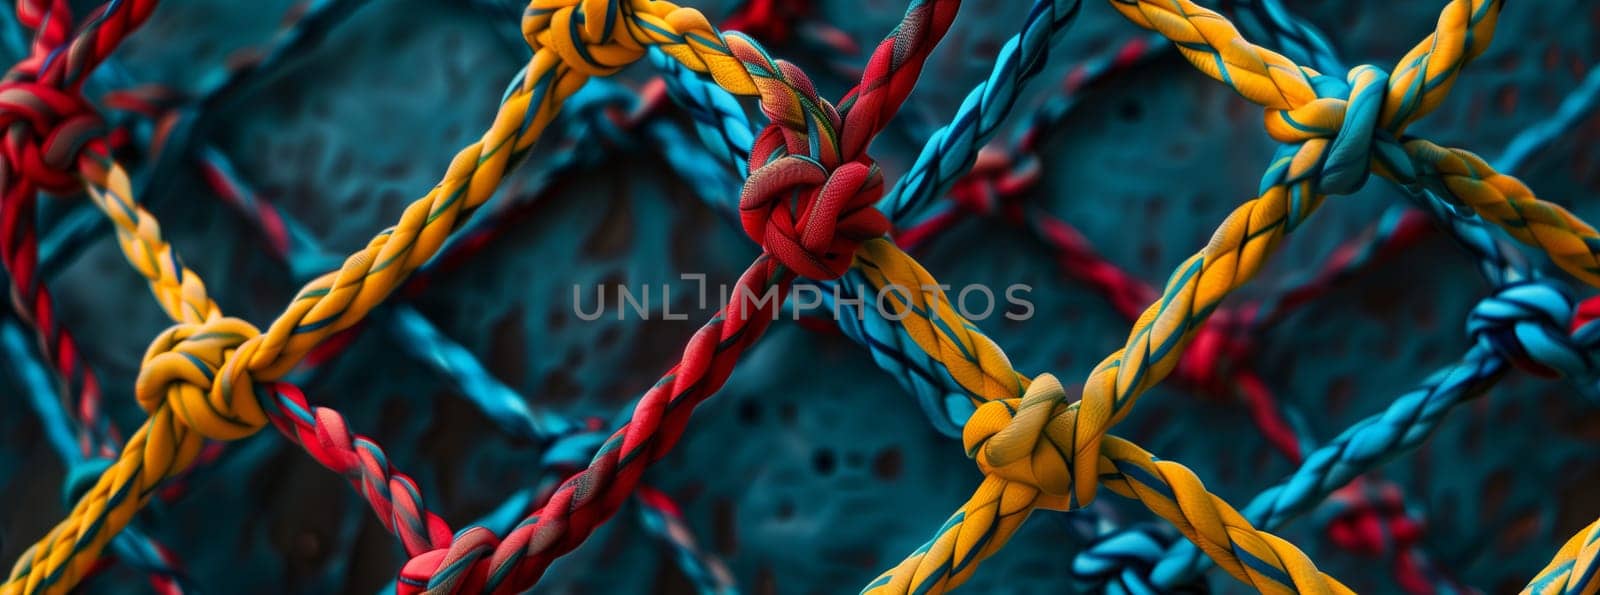 A closeup of a vibrant Azure, Aqua, and Electric blue fishing net with intricate knots, showcasing a beautiful Art pattern of woolen rope